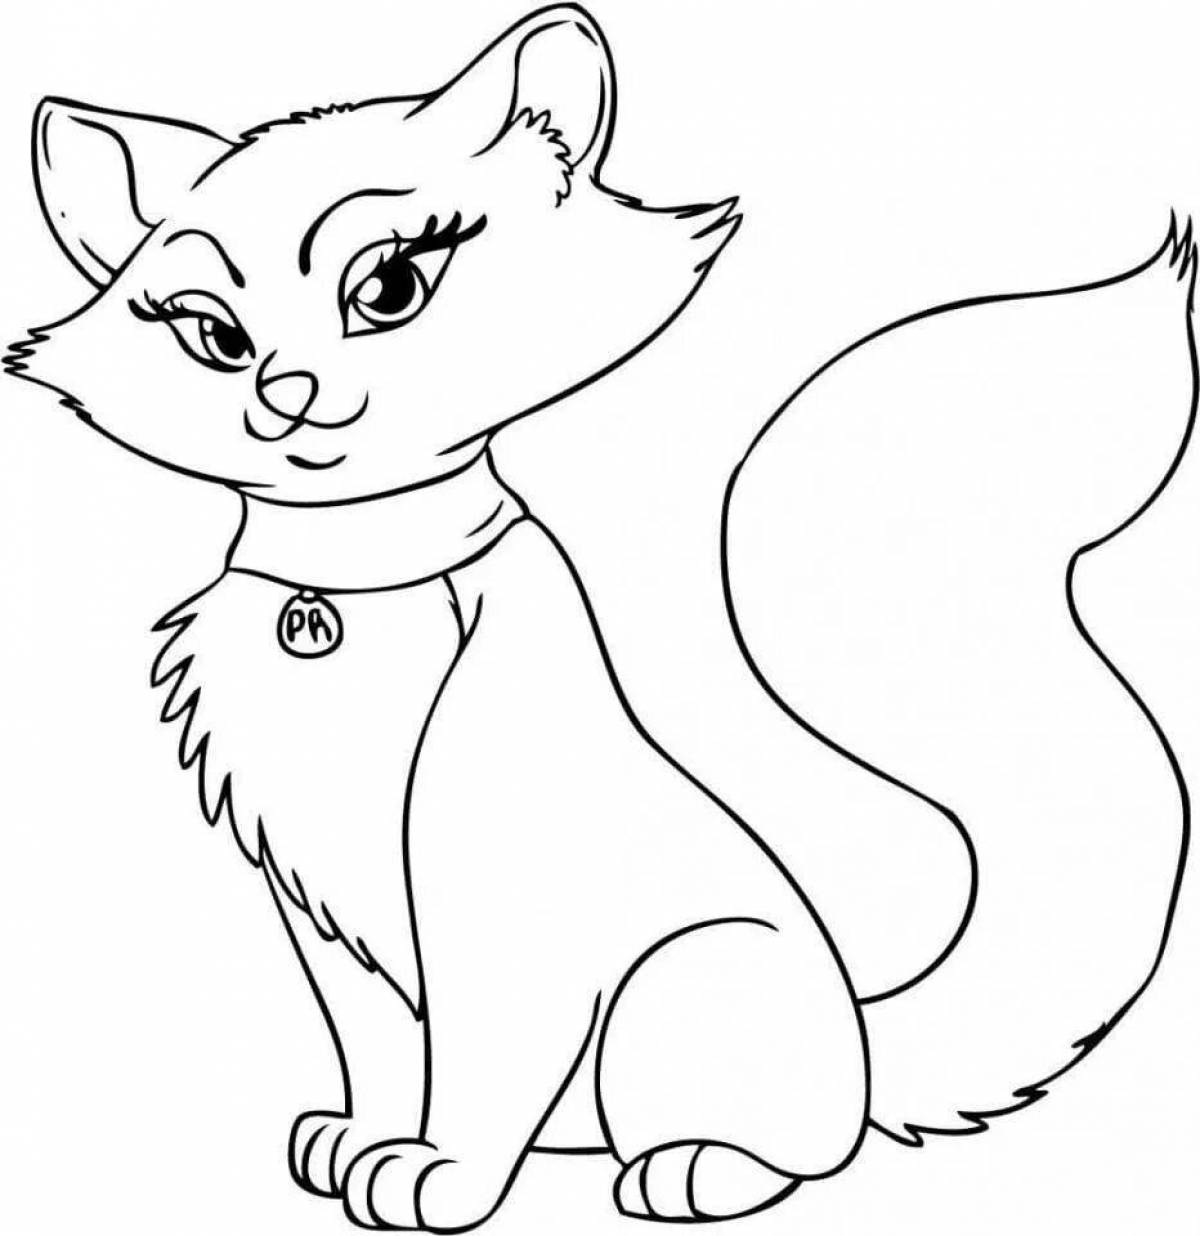 Coloring fluffy cat for kids